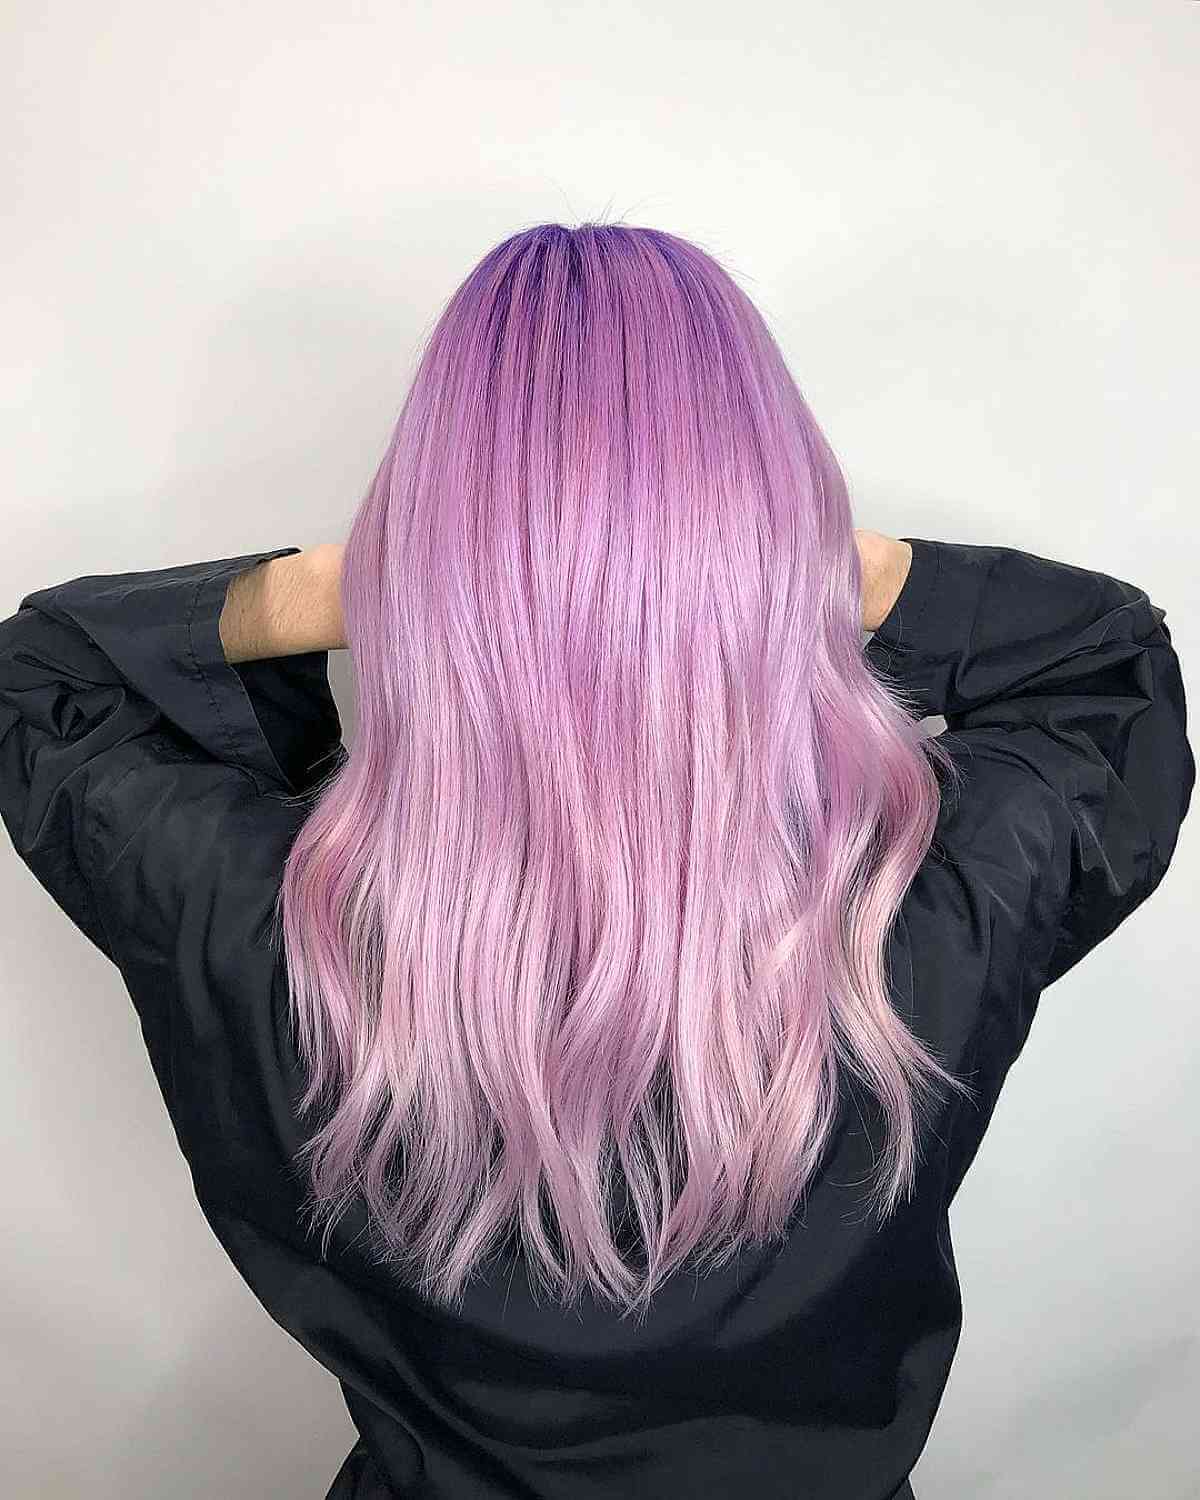 Pastel pink and purple hair color